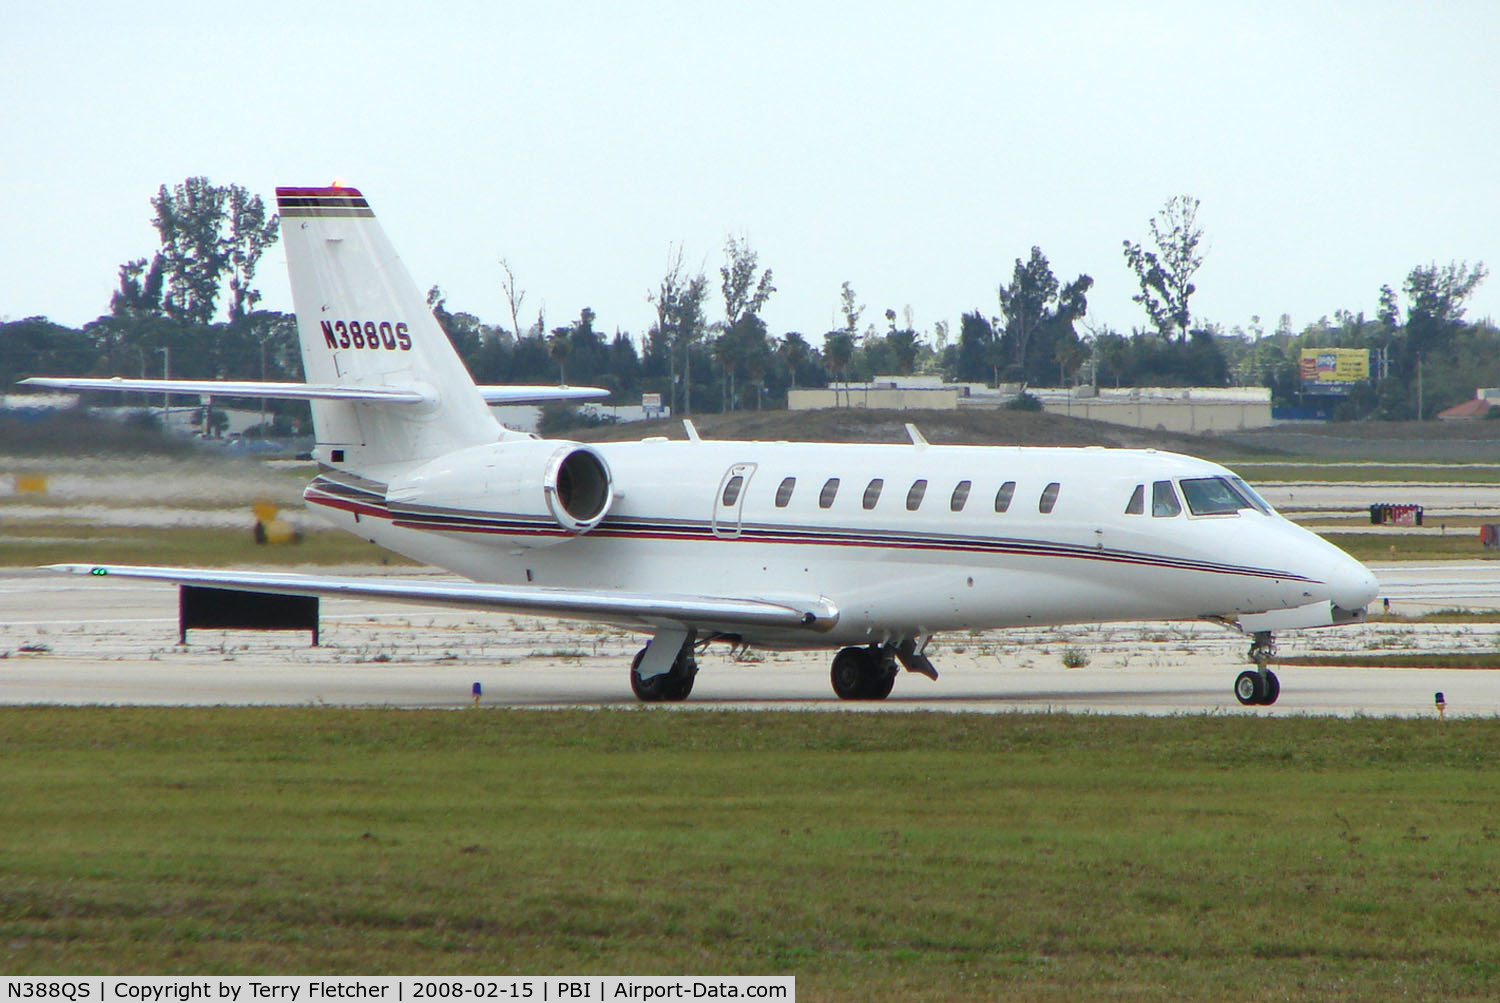 N388QS, 2006 Cessna 680 Citation Sovereign C/N 680-0113, The business aircraft traffic at West Palm Beach on the Friday before President's Day always provides the aviation enthusiast / photographer with a treat